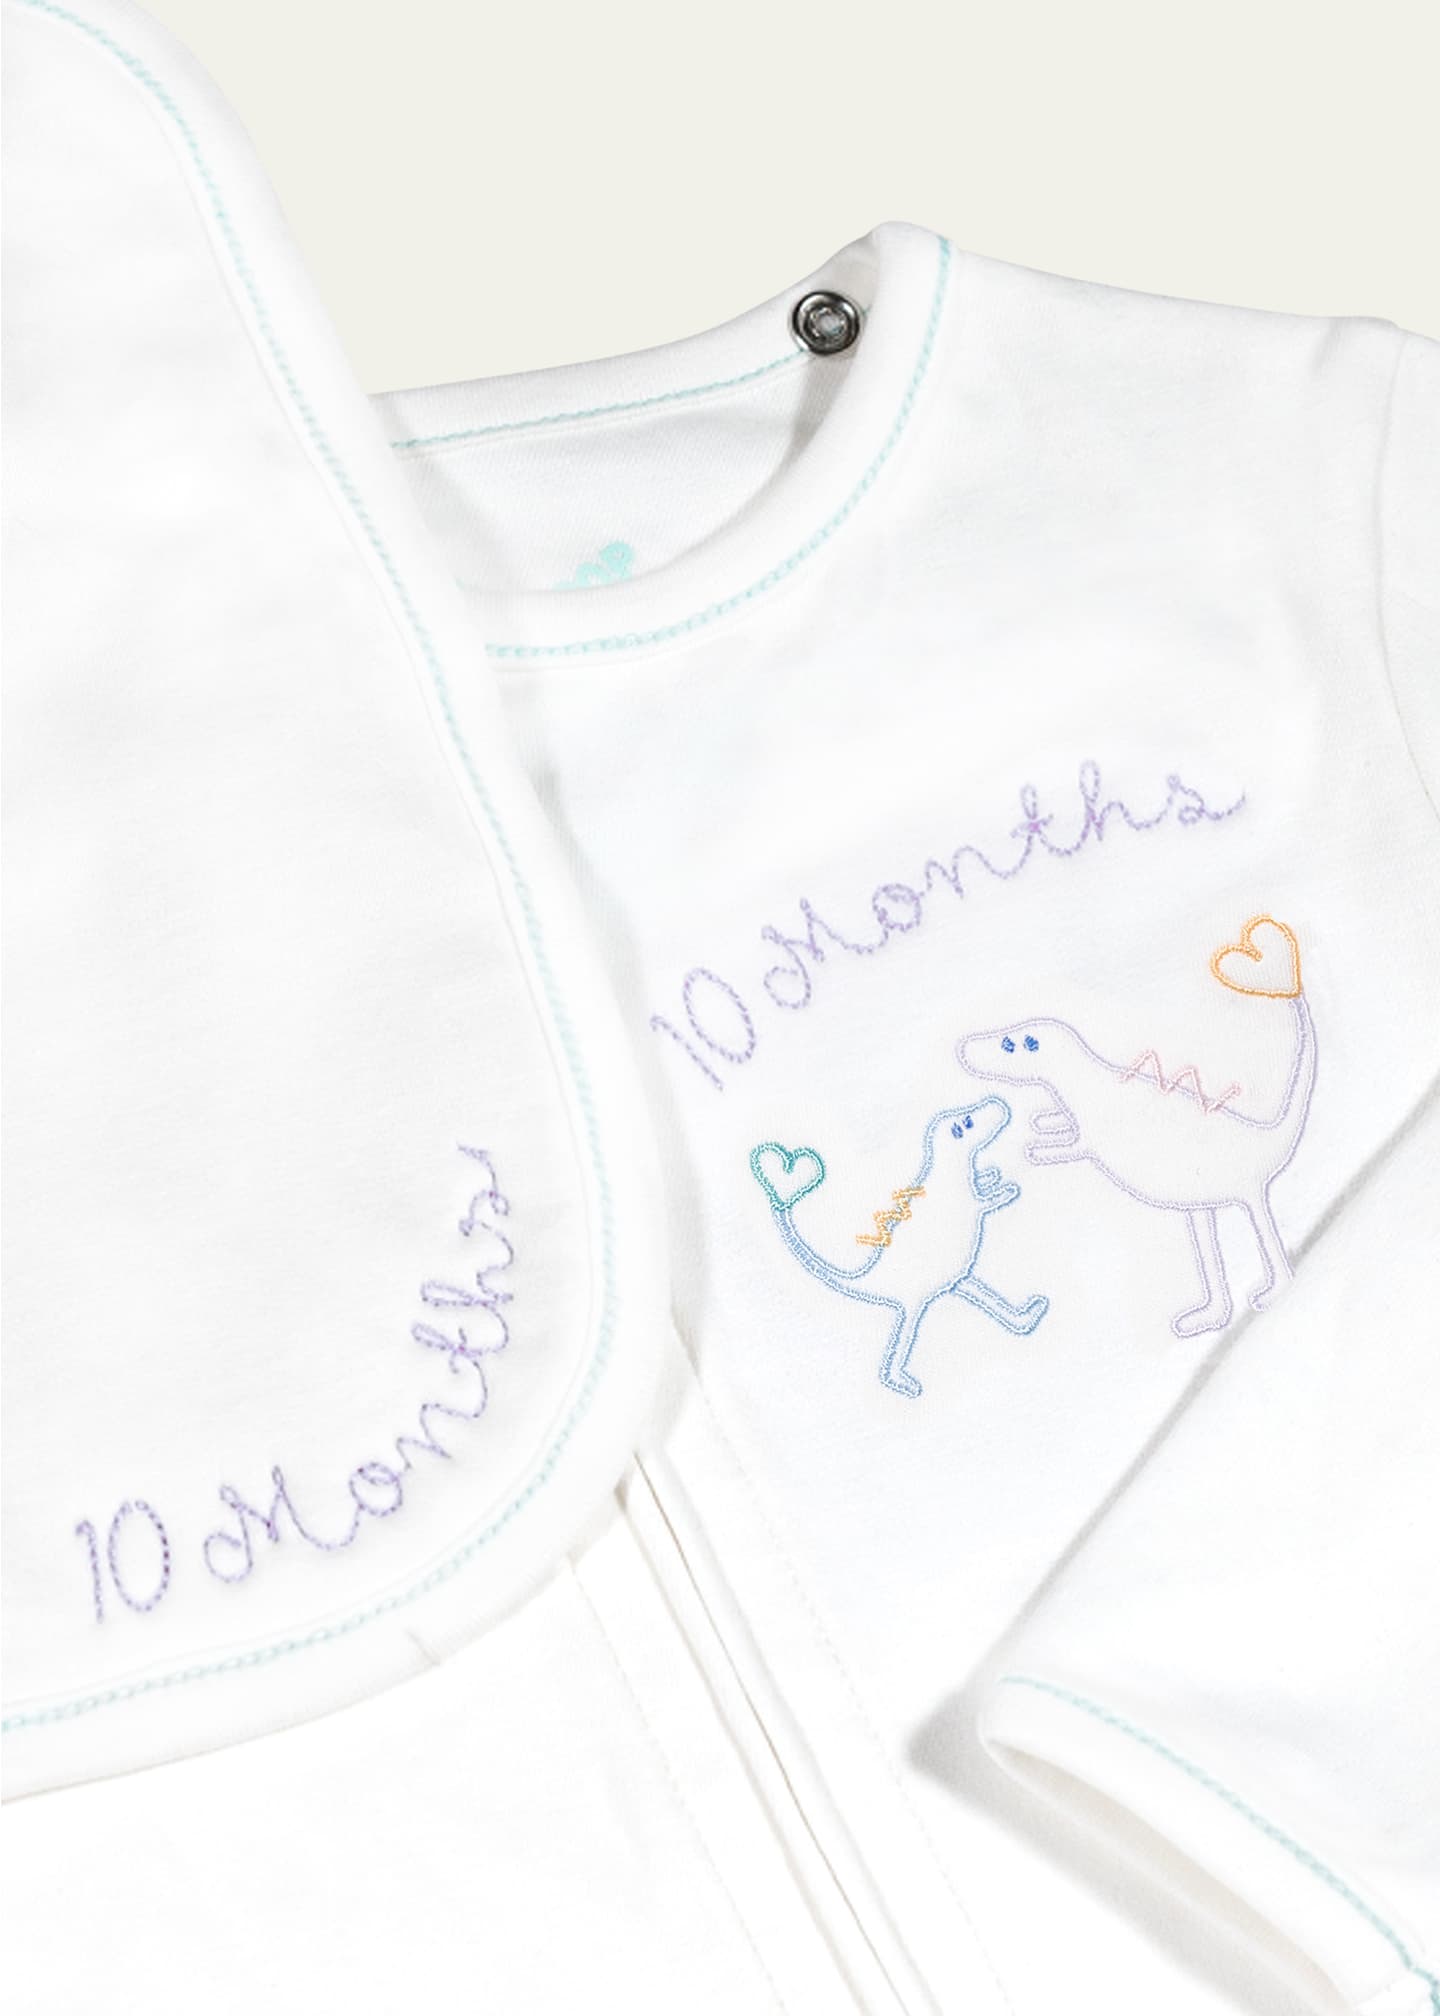 PiP PEA POP Baby Personalized Footed Bodysuit with attachable bib - Growing Bundle Image 4 of 5